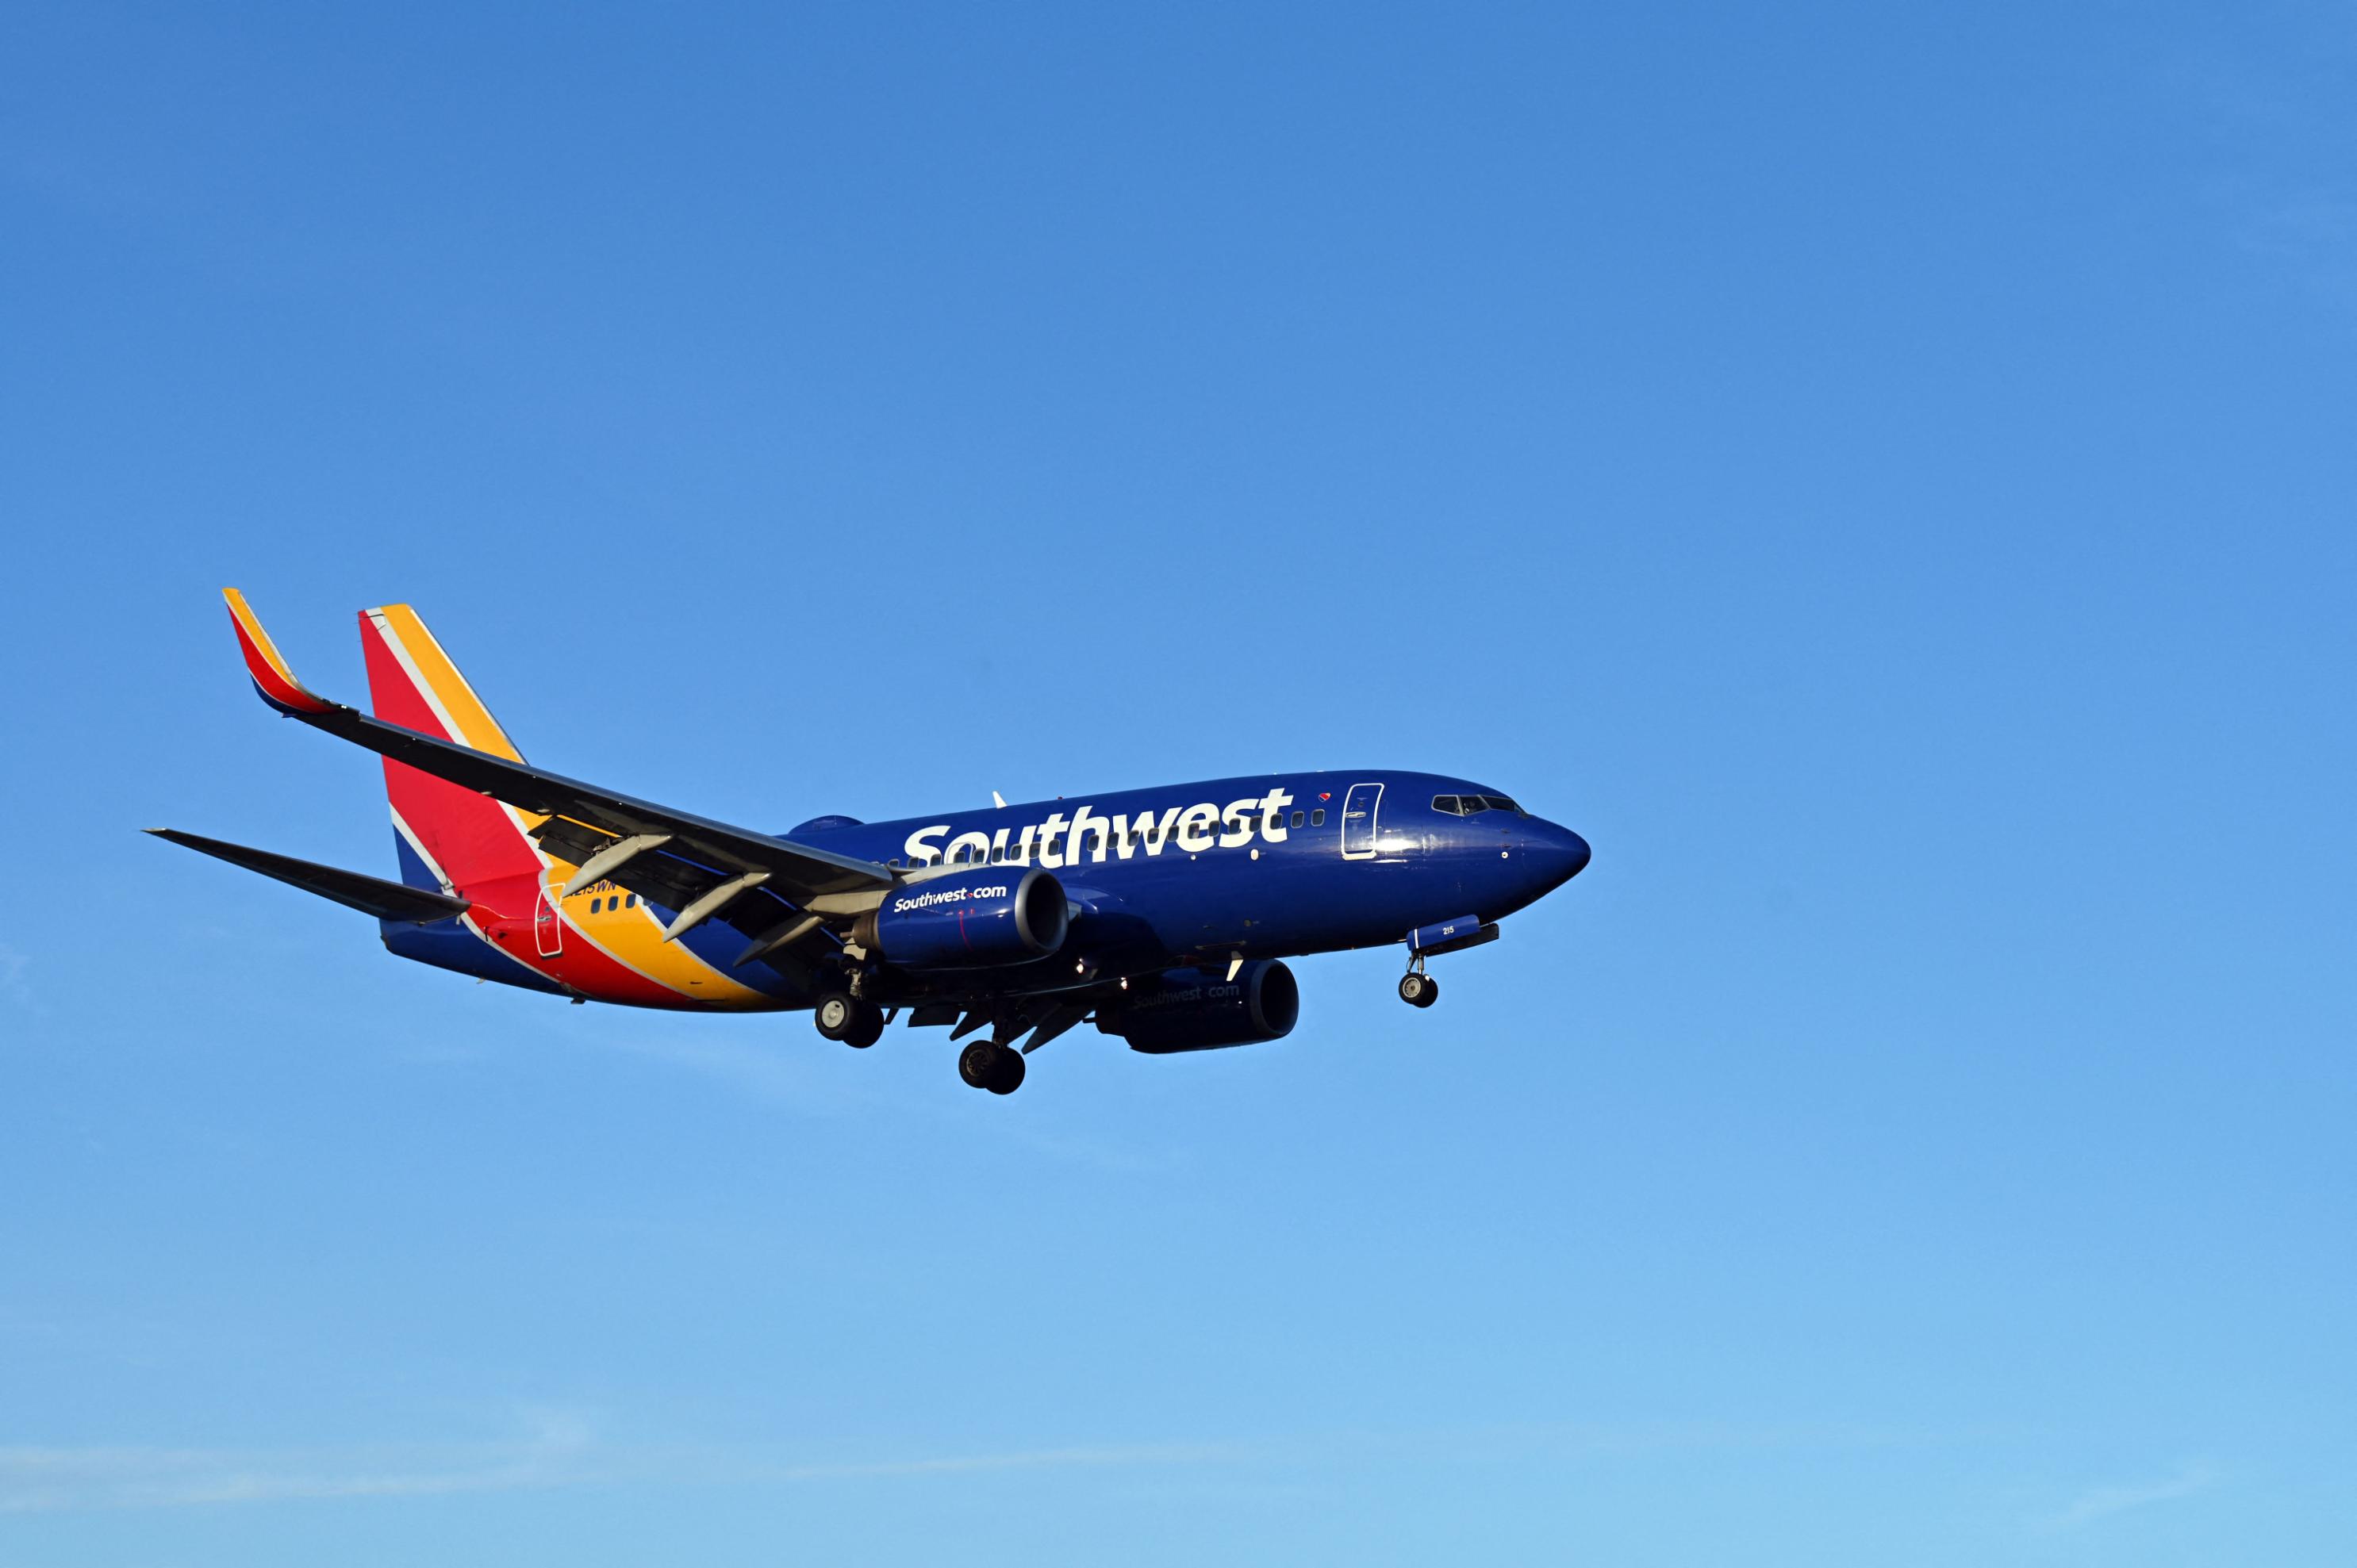 southwest airlines in baltimore case study